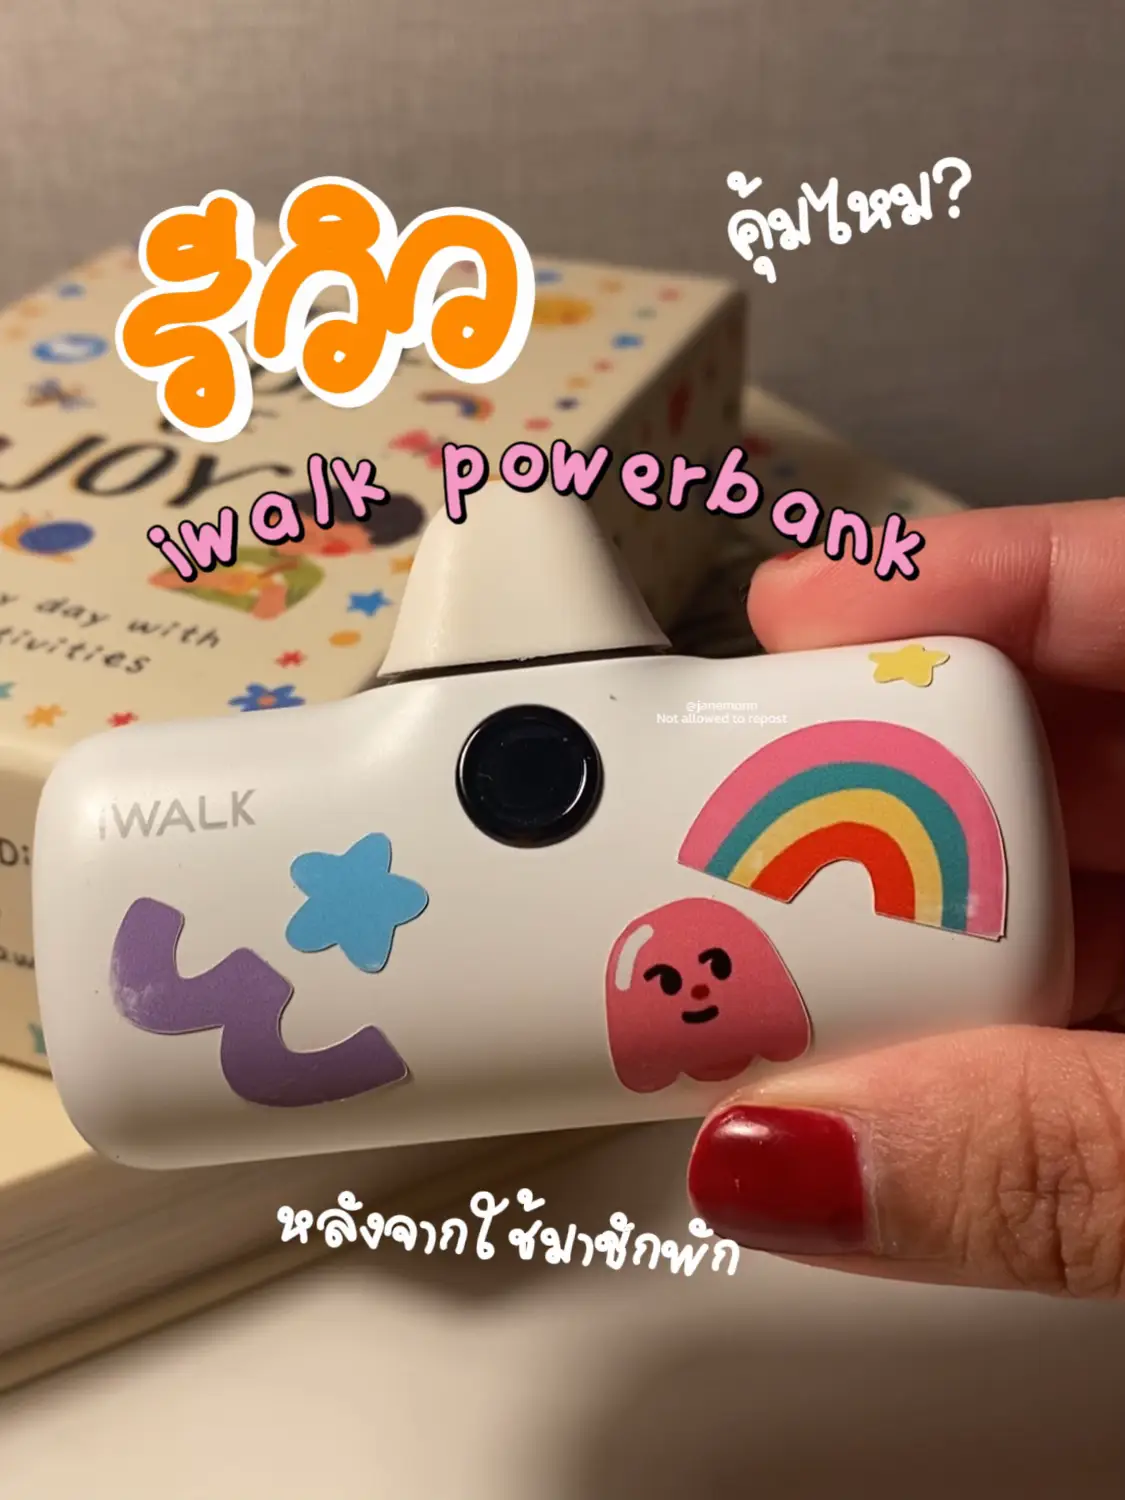 iwalk powerbank review after heavy use 😂, Gallery posted by Janemonn